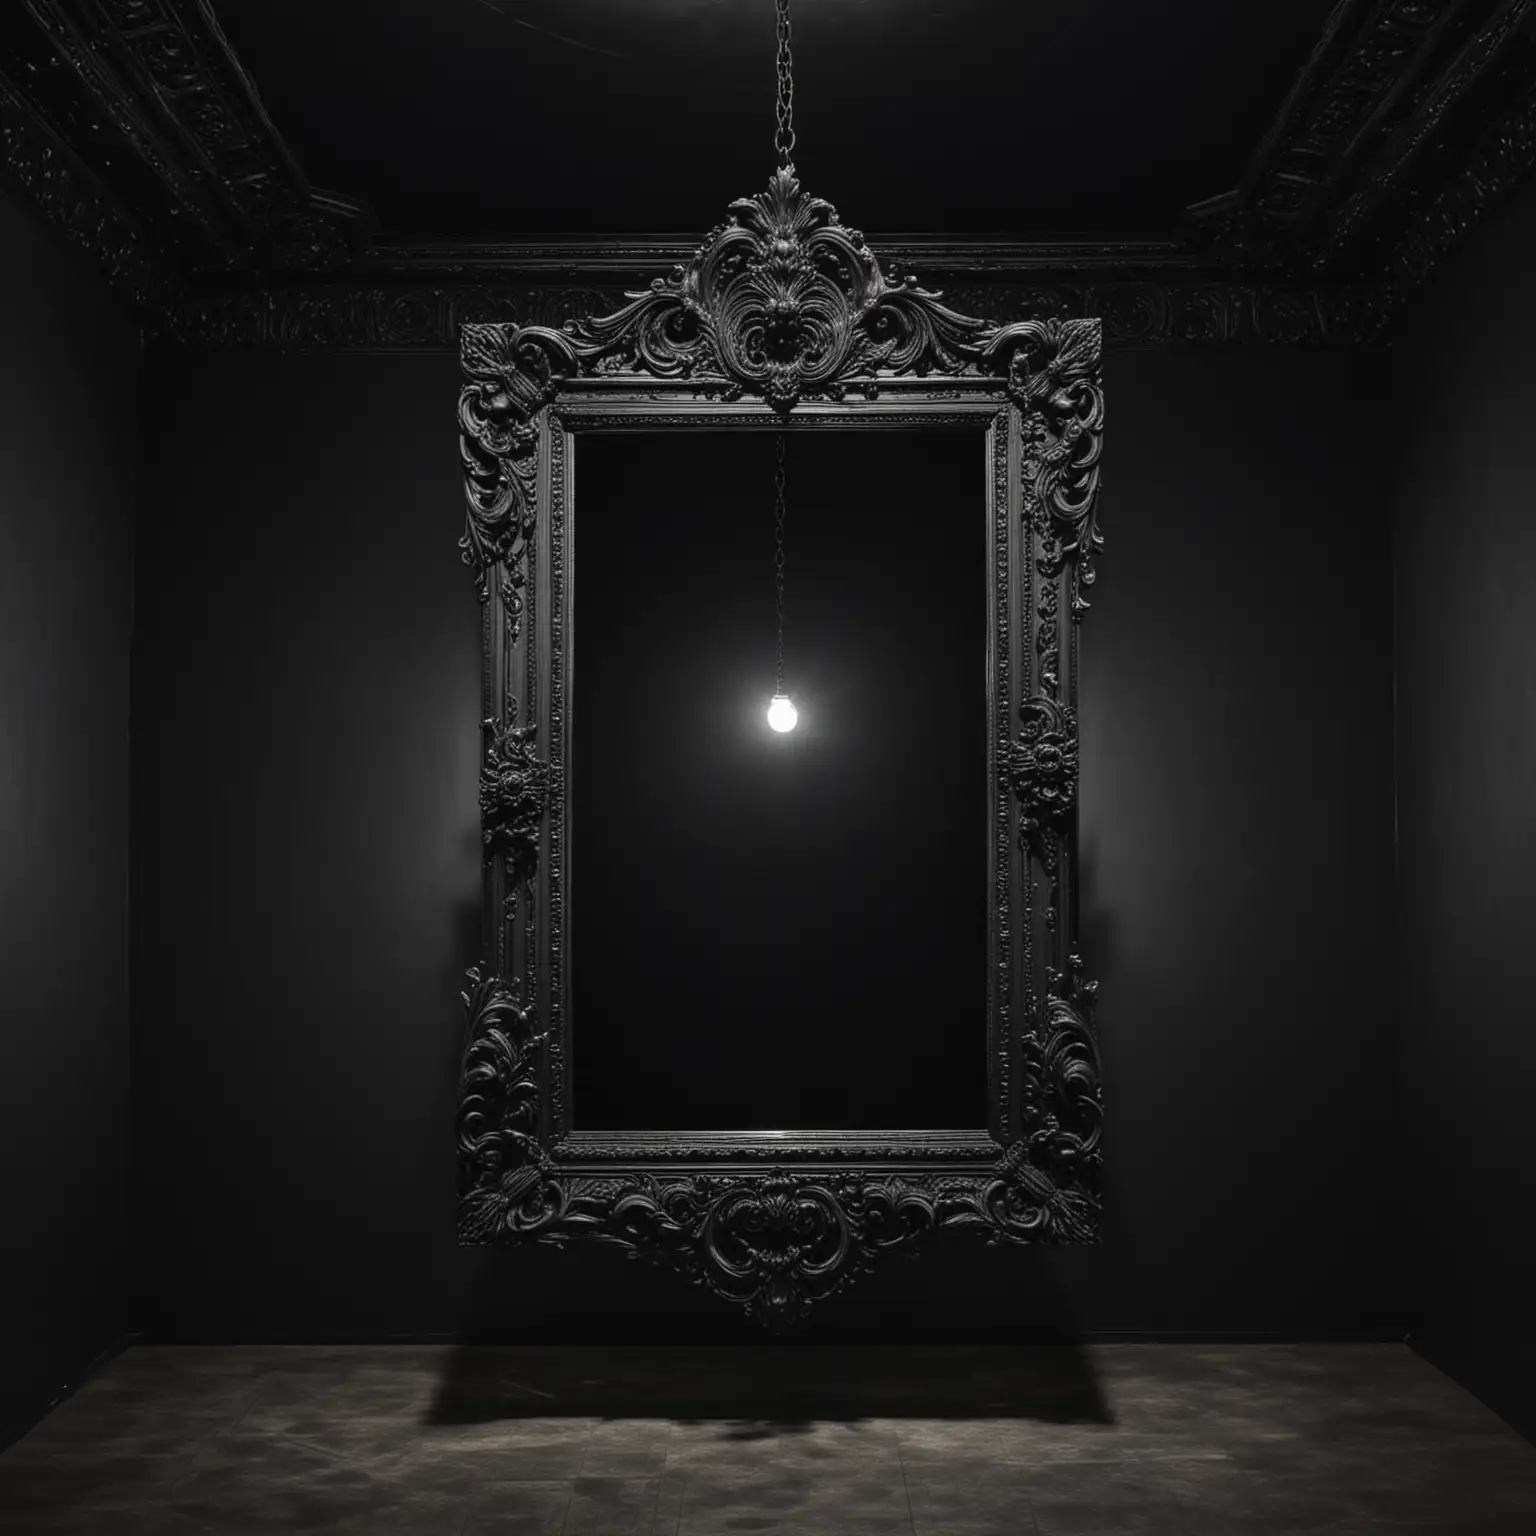 Dark Room with Suspended Ornate Black Mirror of Truths